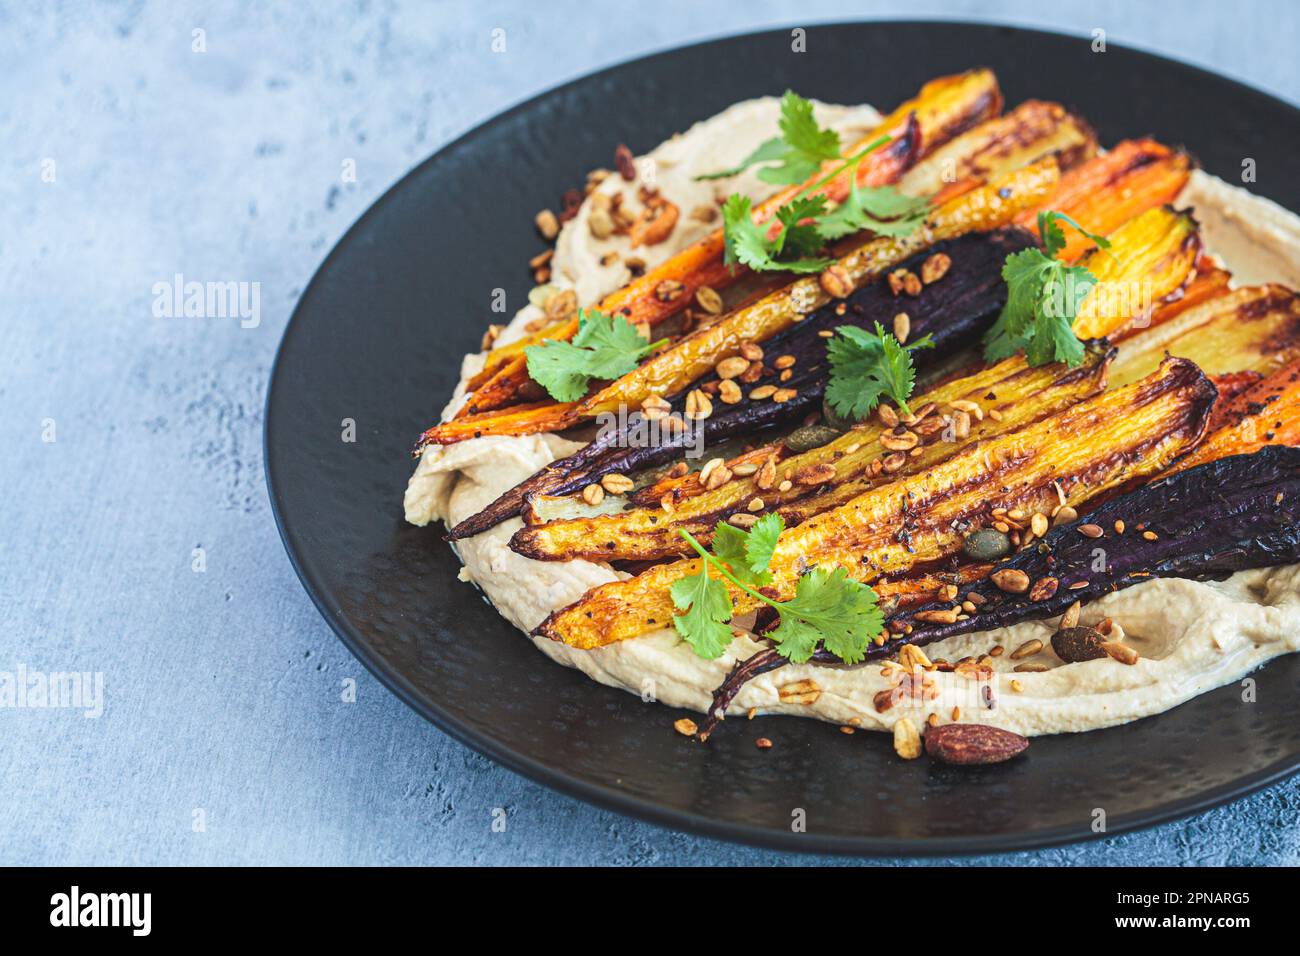 Multicolored baked carrots with hummus on a black plate. Vegan recipe. Stock Photo